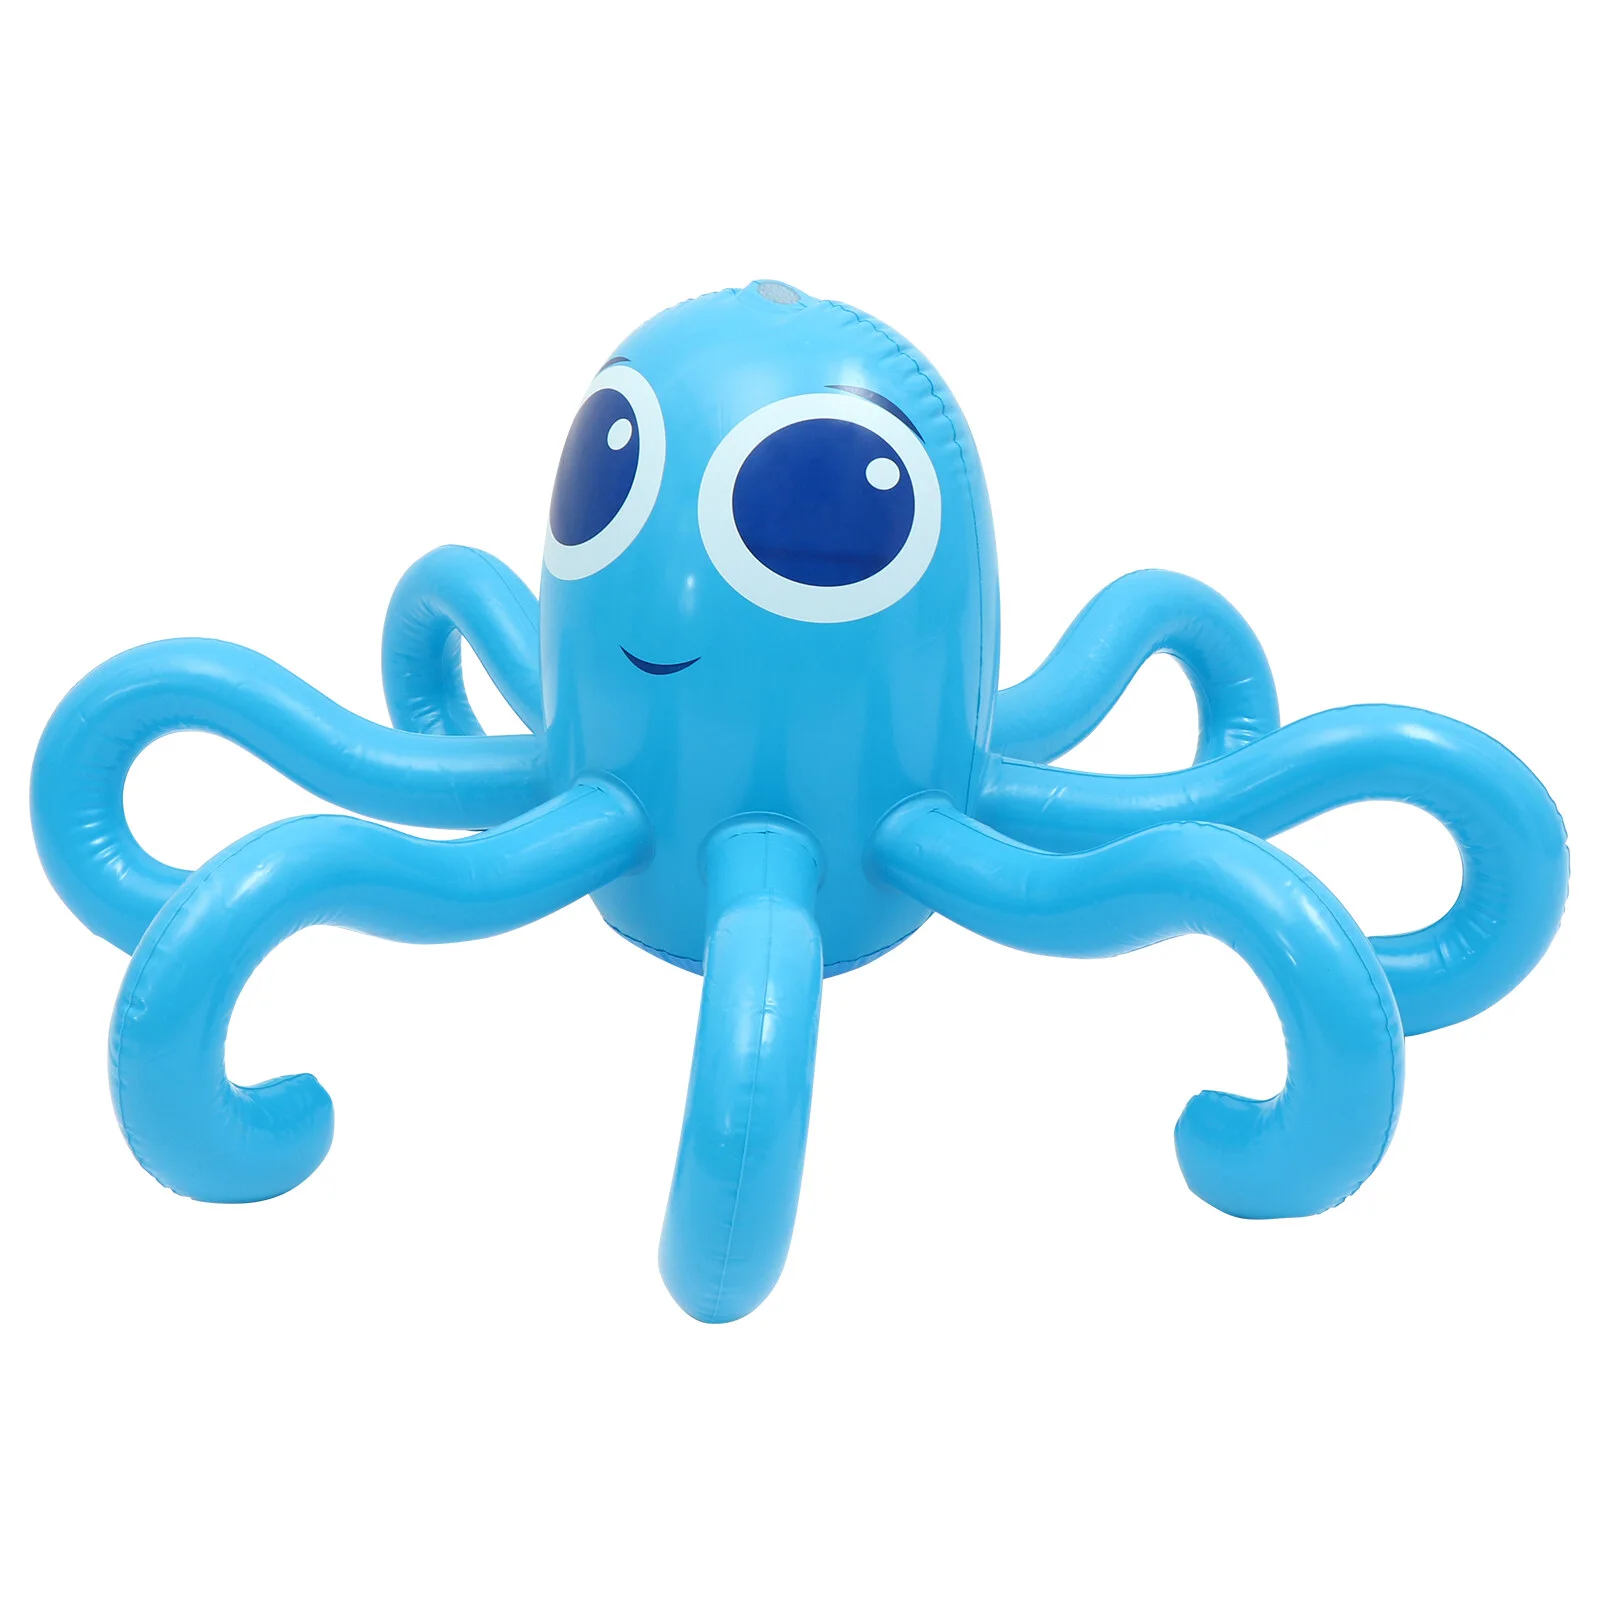 

Outdoor Water Spraying Toy Inflatable Lawn Lovely Kids Toys Animal Octopus Design Sprinkler Park Plaything Summer